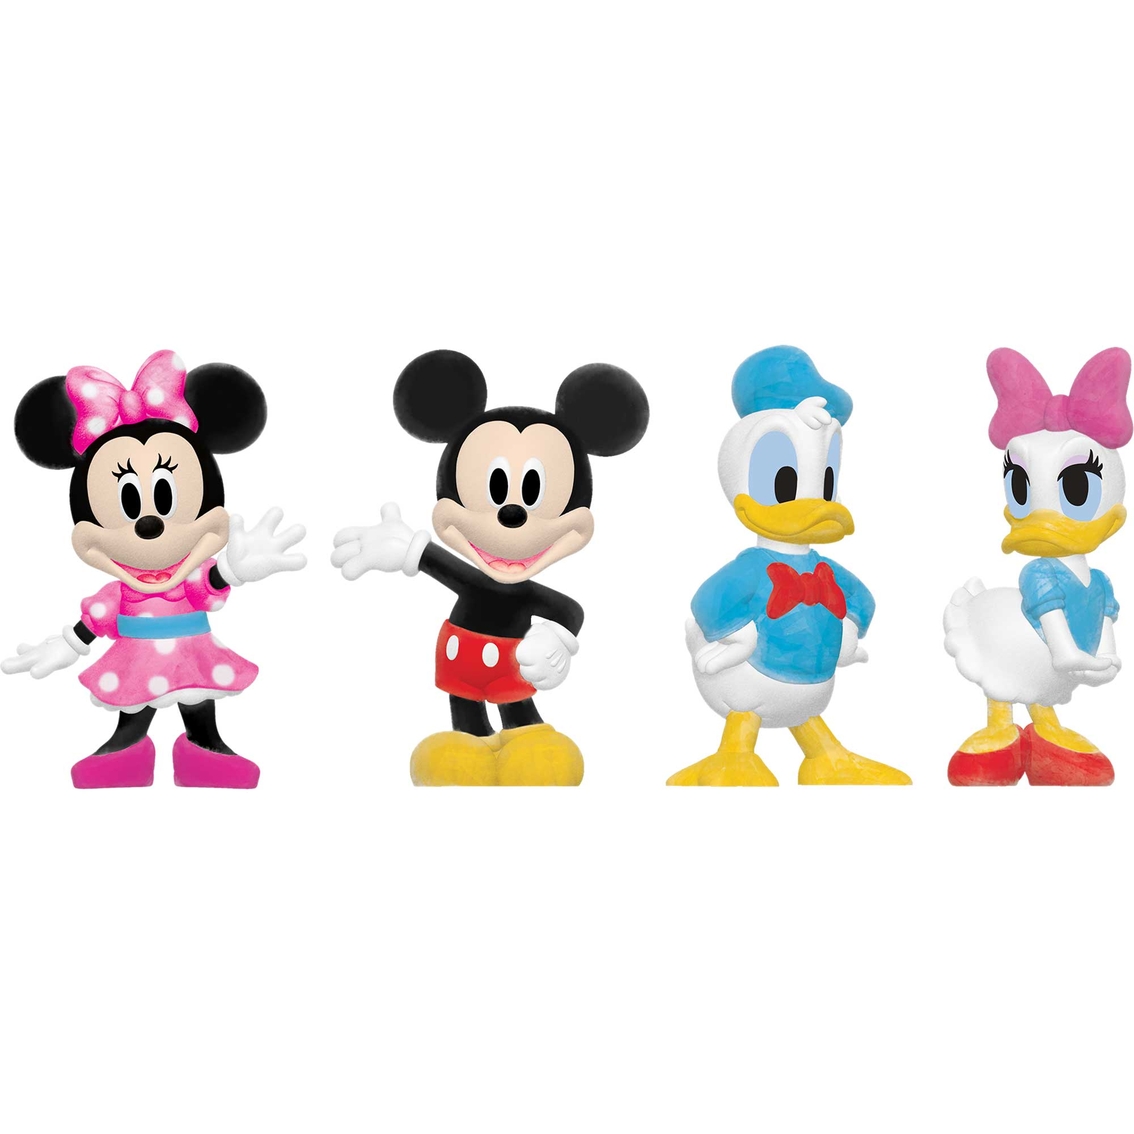 Cra-Z-Art Disney Mickey Mouse and Friends Color N' Recolor 3D Characters Set - Image 9 of 9